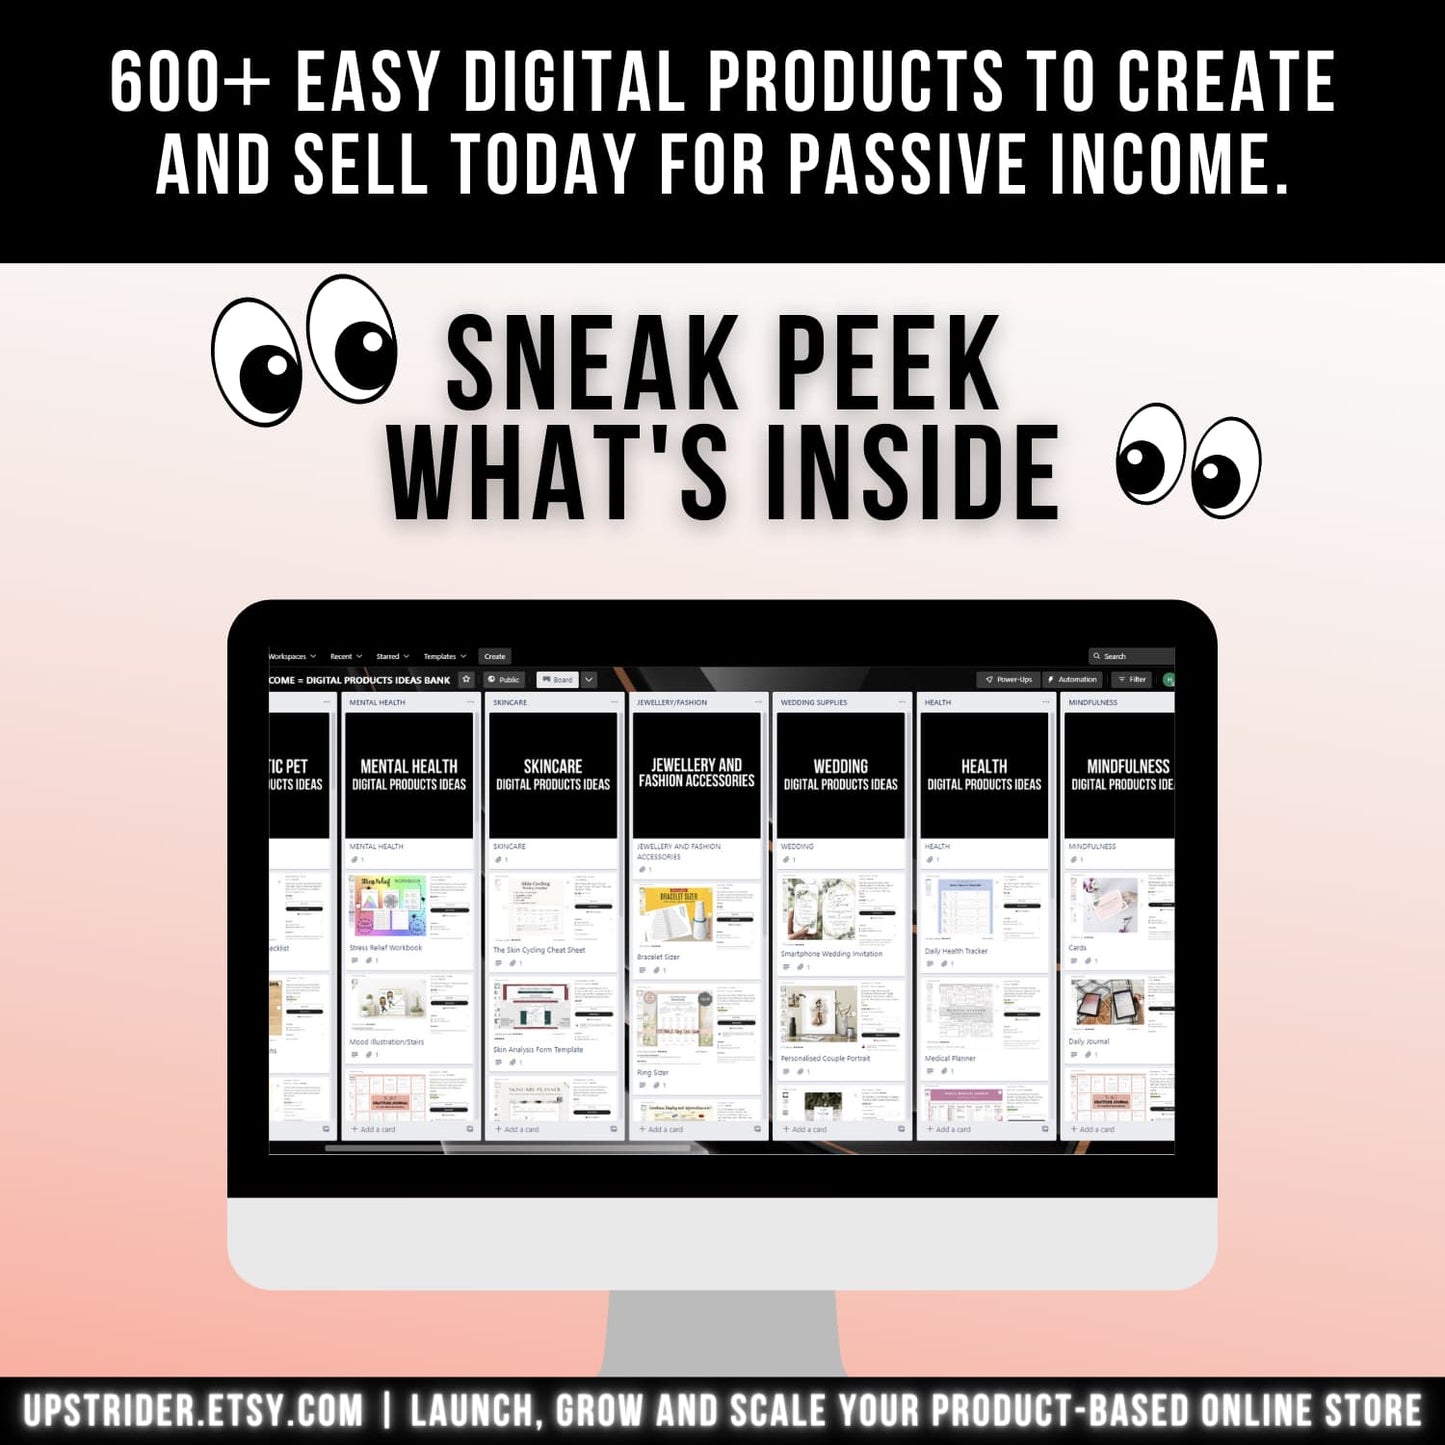 600+ Digital Products Ideas To Create And Sell Today For Passive Income, Etsy Digital Downloads Small Business Ideas and Bestsellers to Sell